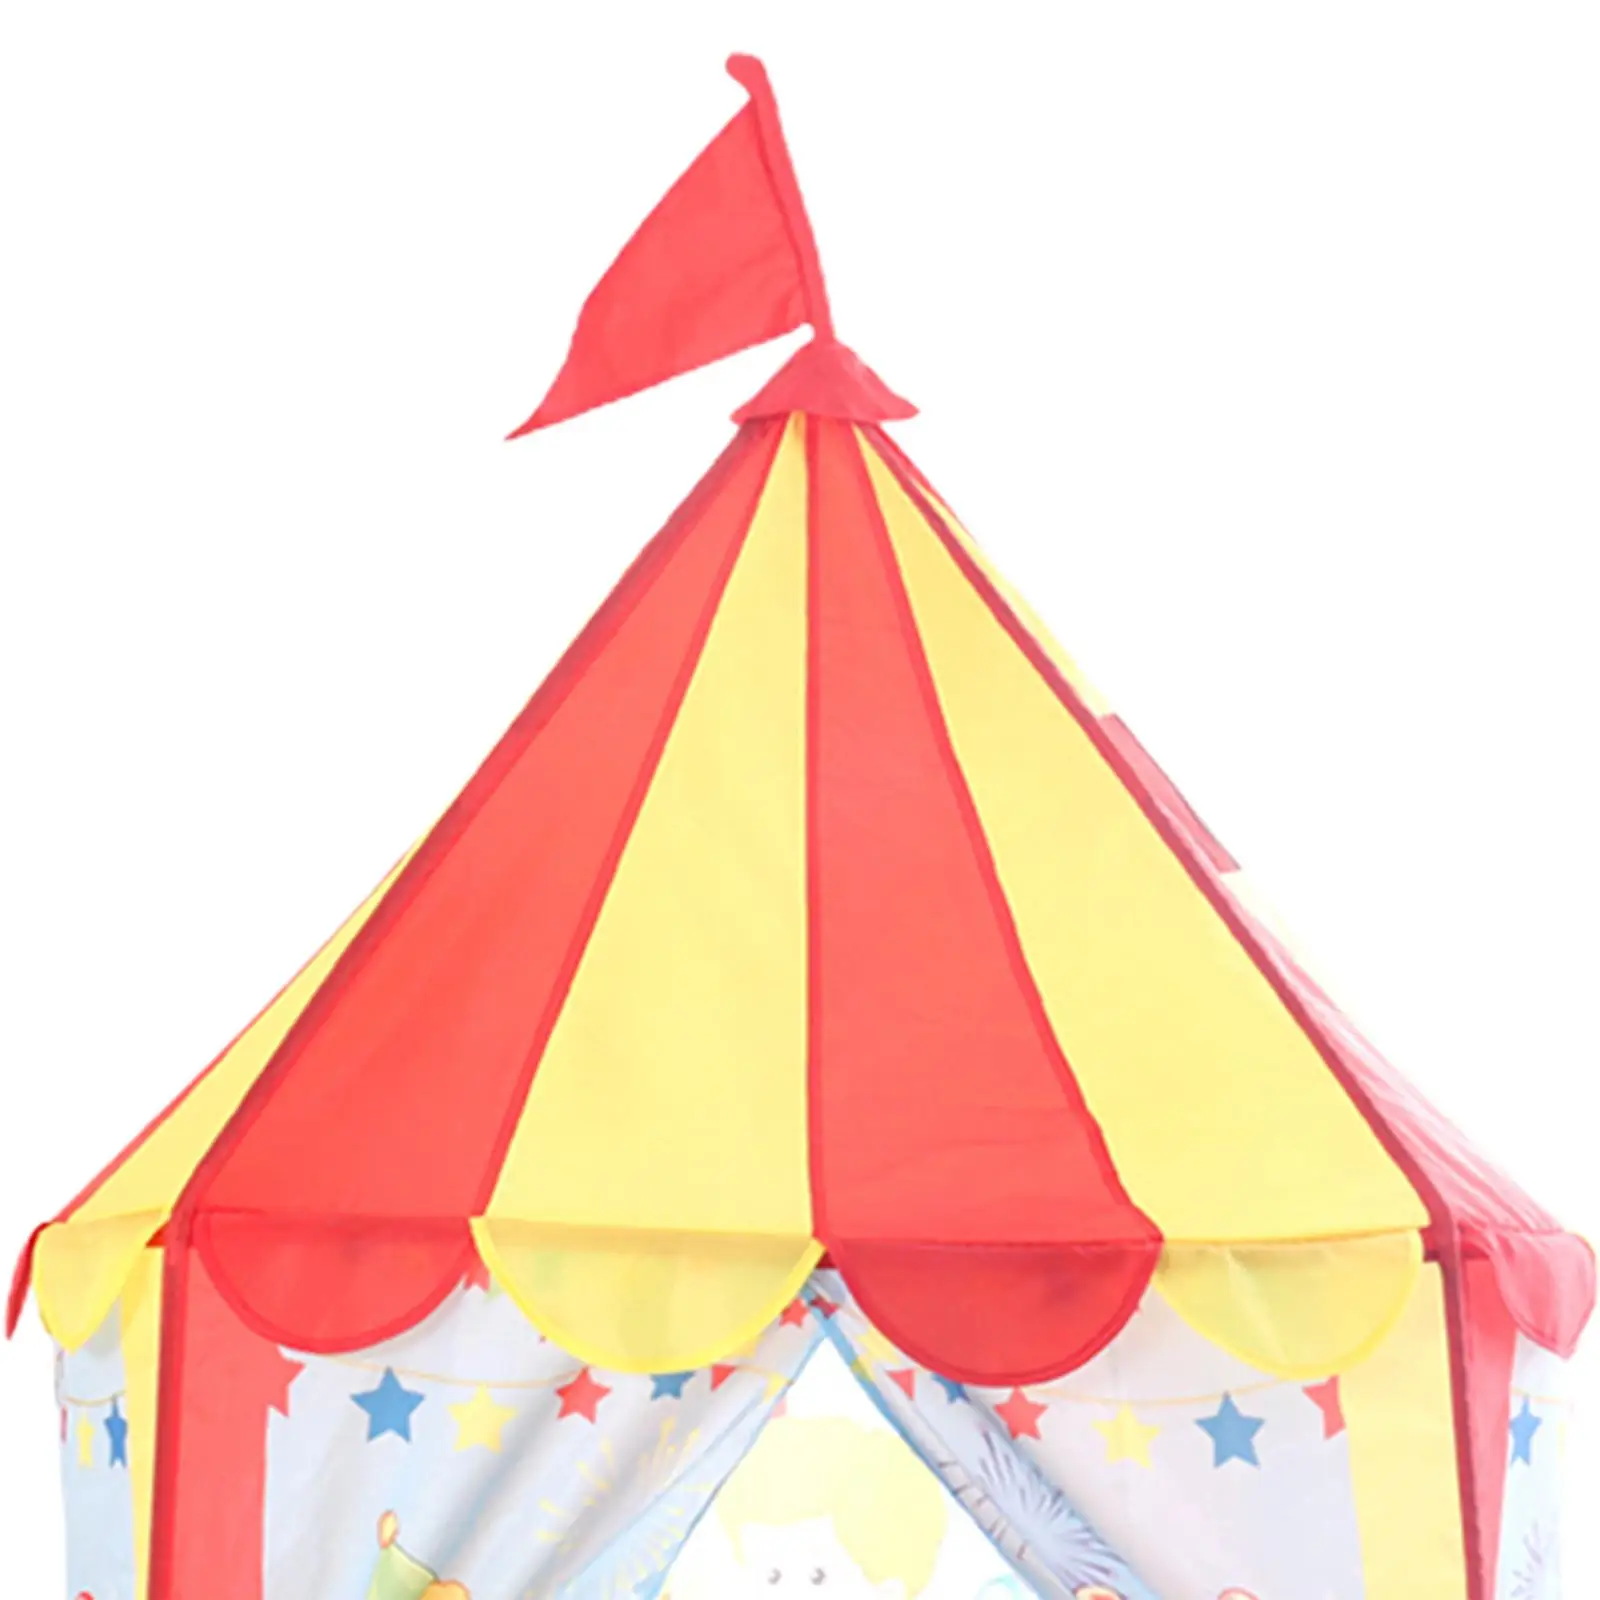 Play Tent Best Gift for Boys Girls Play Teepee Kids Playhouse Prince Castle Tent for Games Yard Camping home